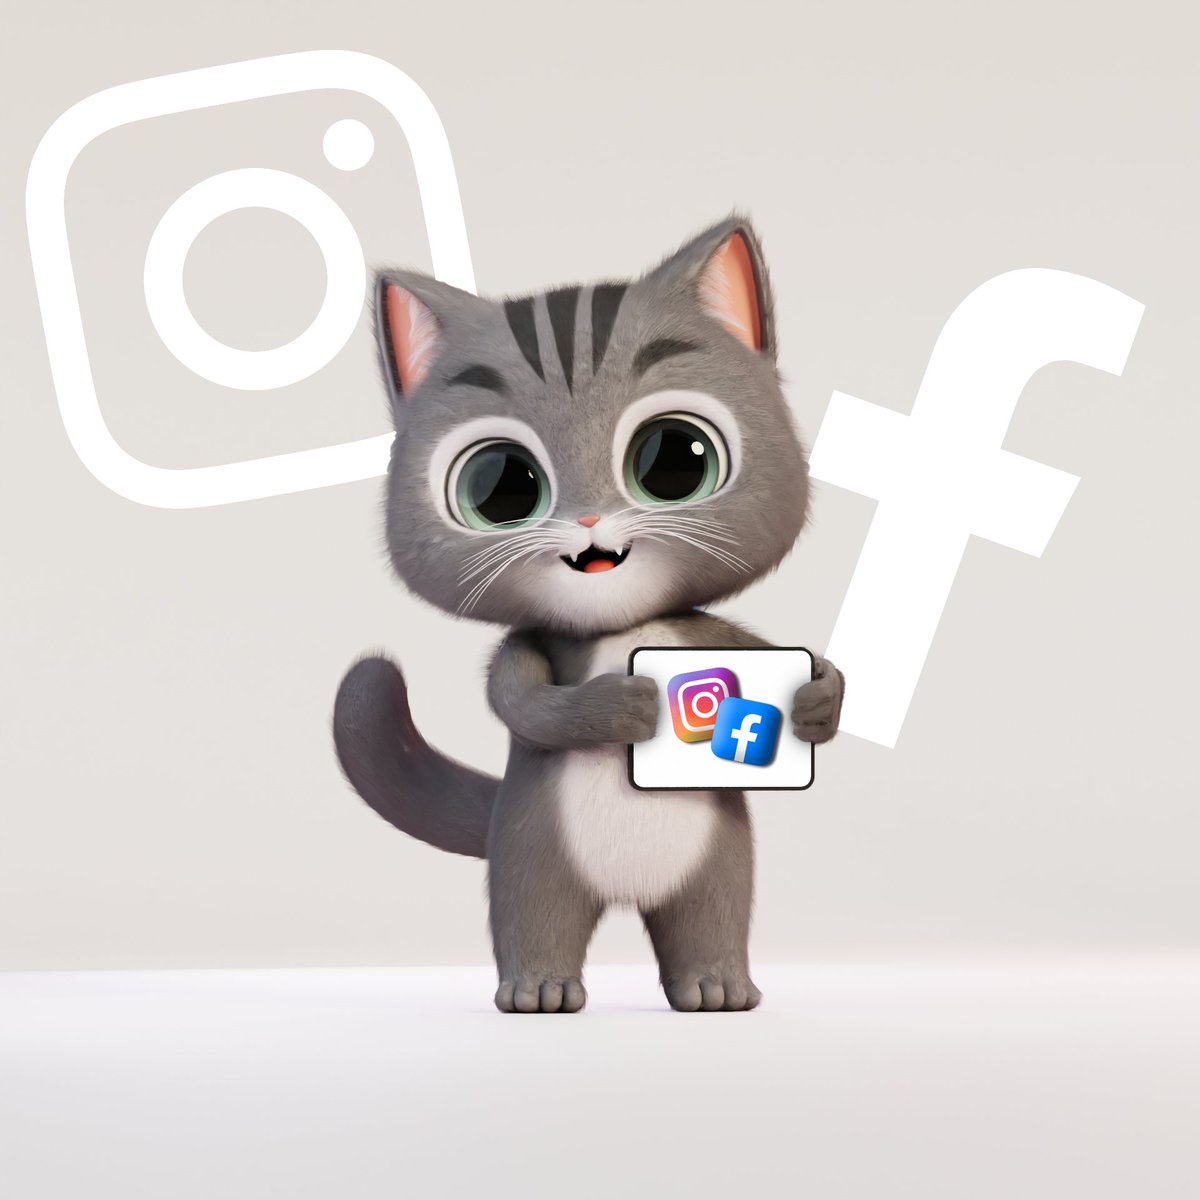 BobaCat is now on Instagram and Facebook to reach a wider audience and enhance our connection with pet shelters globally! 🌍🐾 🎥 Check out our first video on these platforms to see what we’re all about. Make sure to follow us for more updates and engaging content: Instagram: